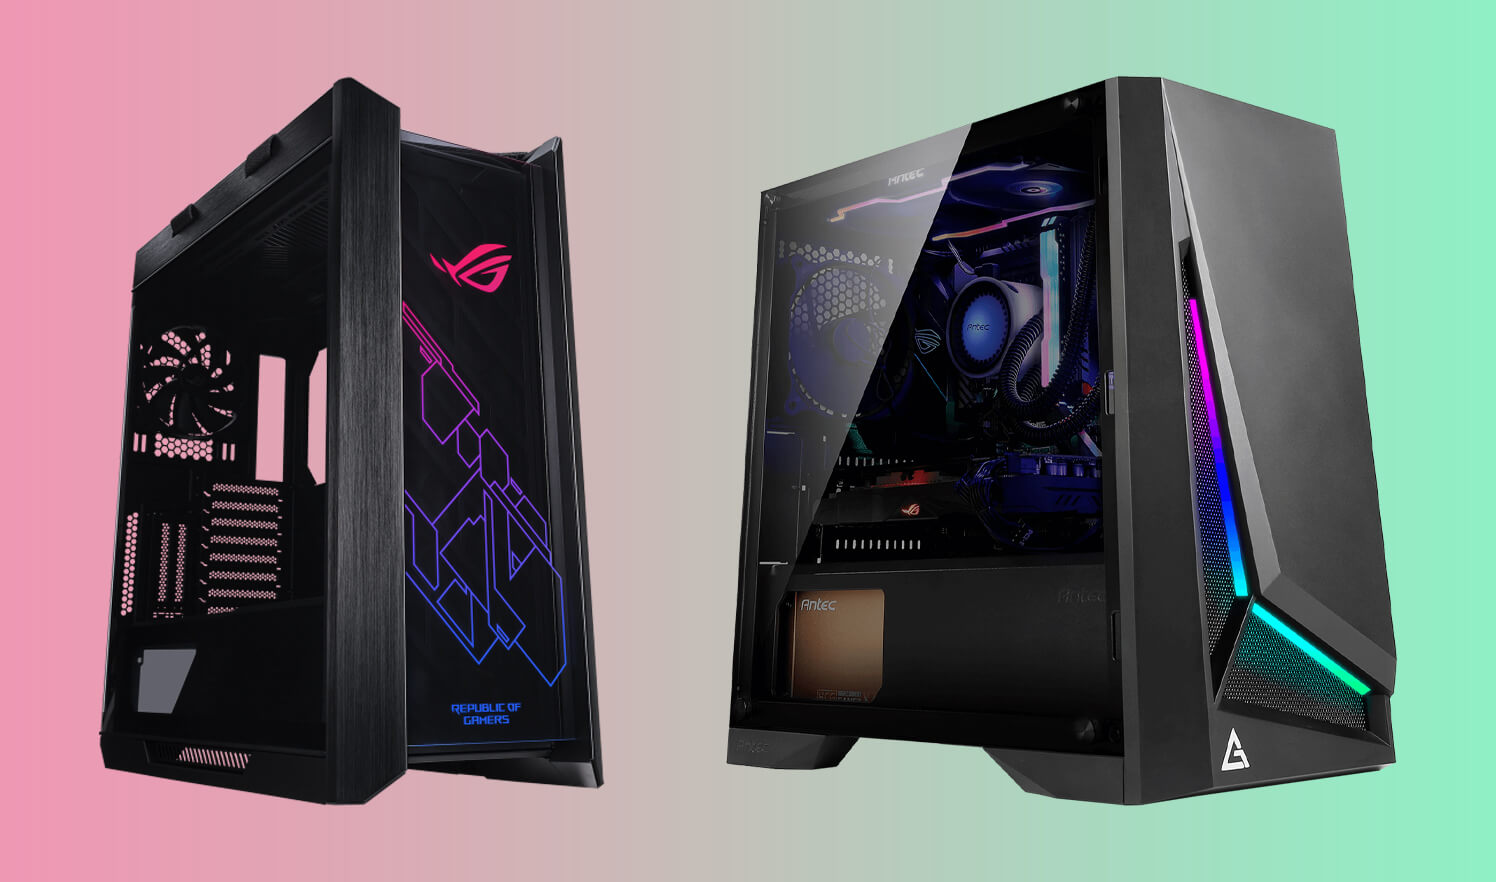 The 8 Best RGB Motherboards of 2021